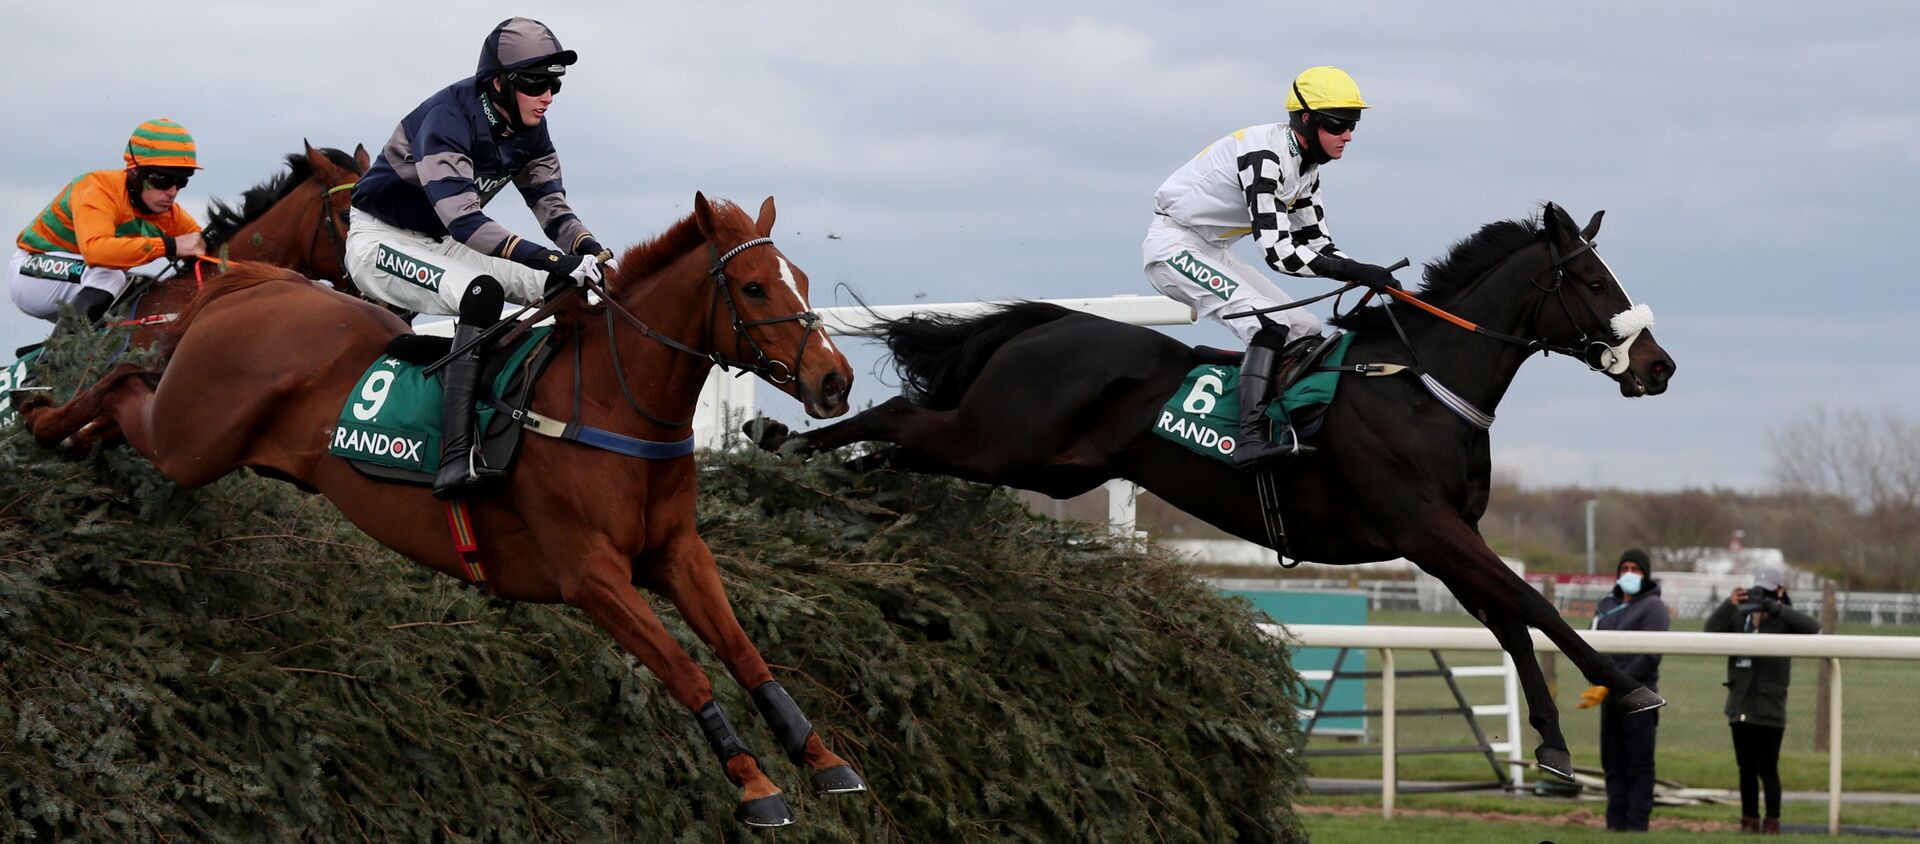 Horse Racing - Grand National Festival - Aintree Racecourse, Liverpool, Britain - April 8, 2021 Cousin Pascal ridden by James King clears the chair on their way to winning the 4:05 Rose Paterson Randox Foxhunters’ Open Hunters’ Chase - Sputnik International, 1920, 09.04.2021